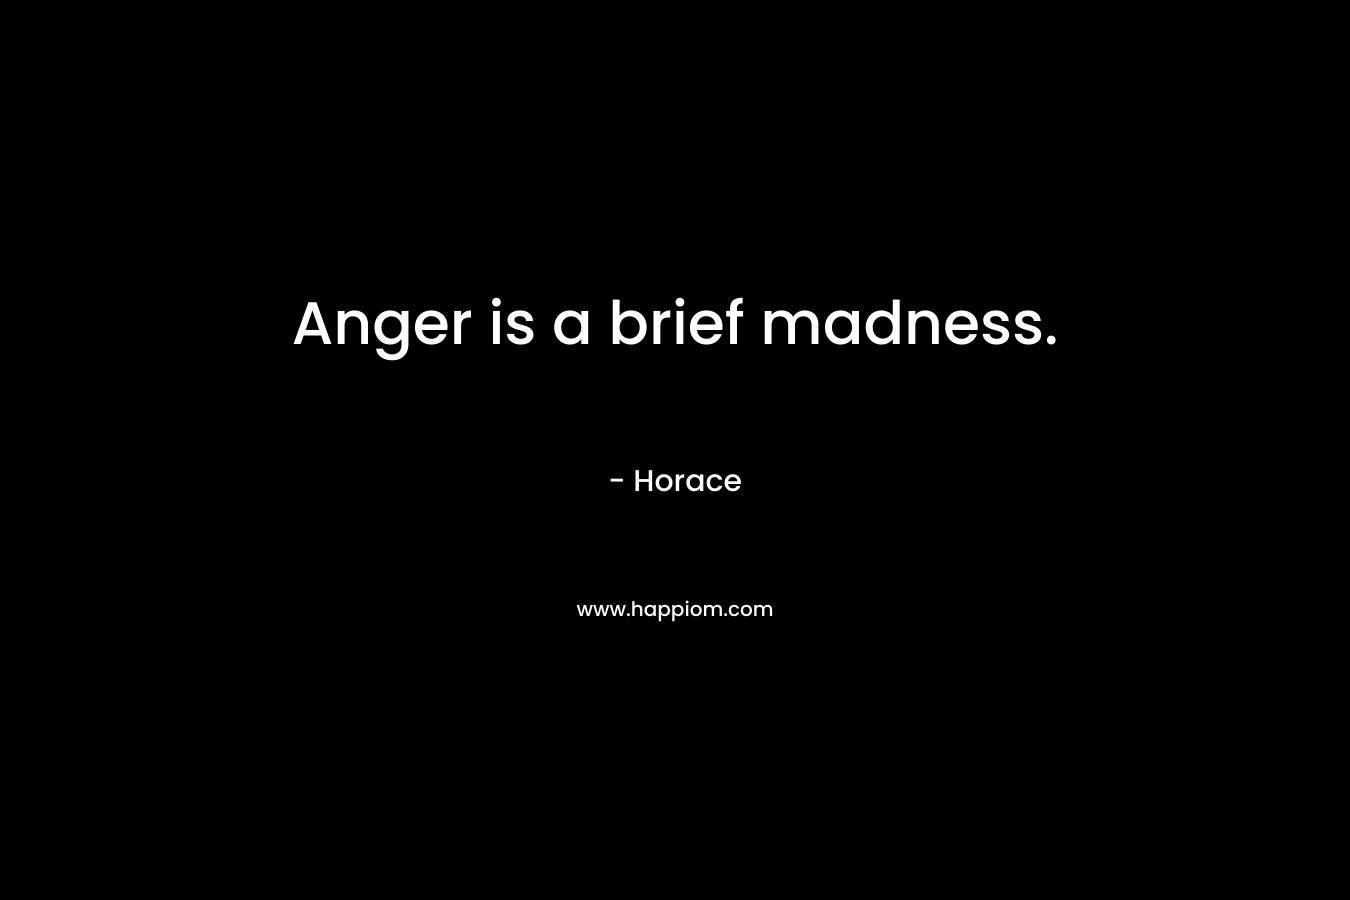 Anger is a brief madness. – Horace